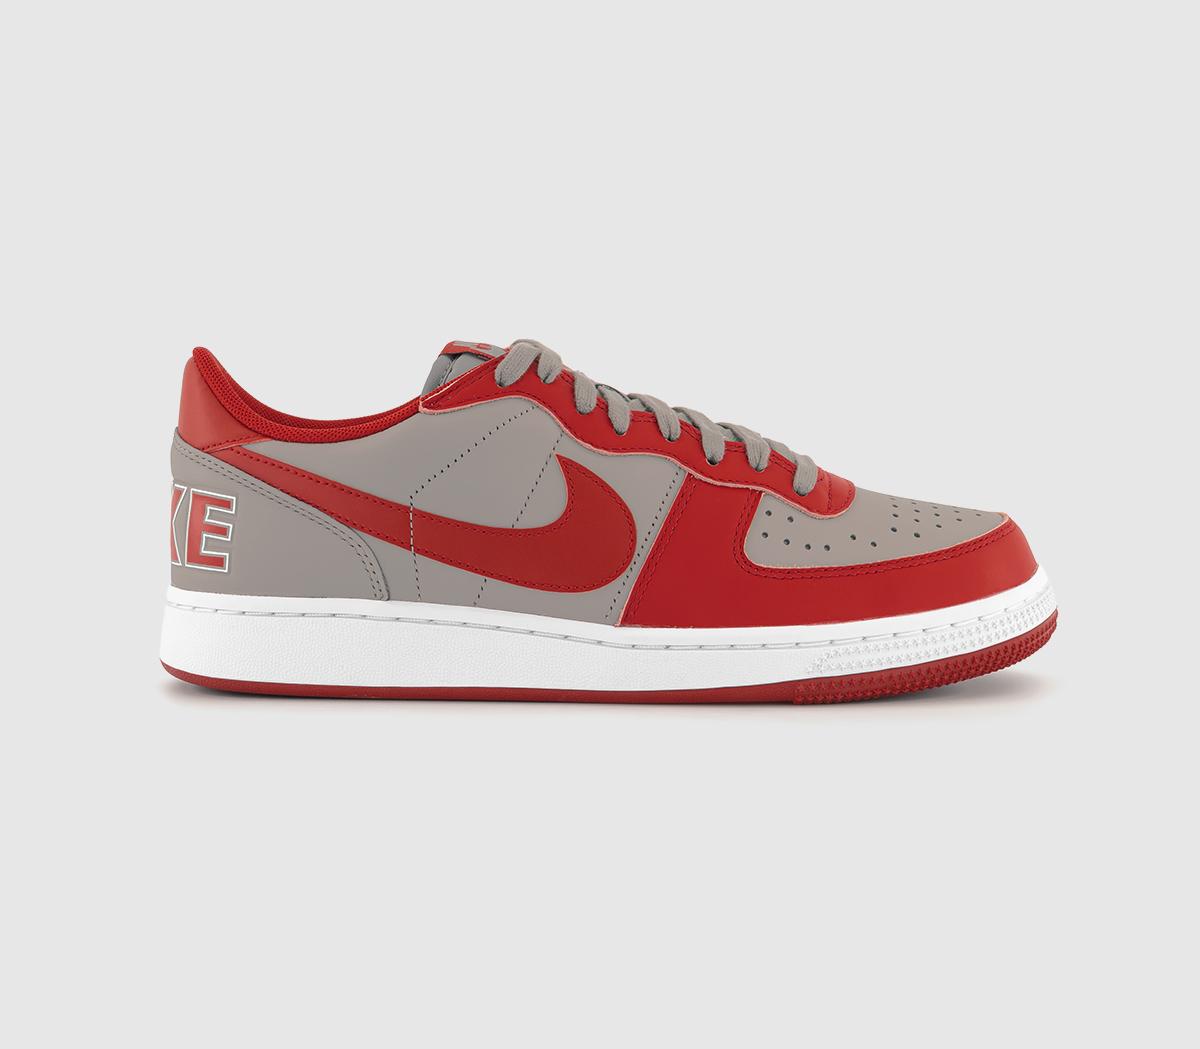 NikeTerminator Low Trainers Med Grey Varsity Red White